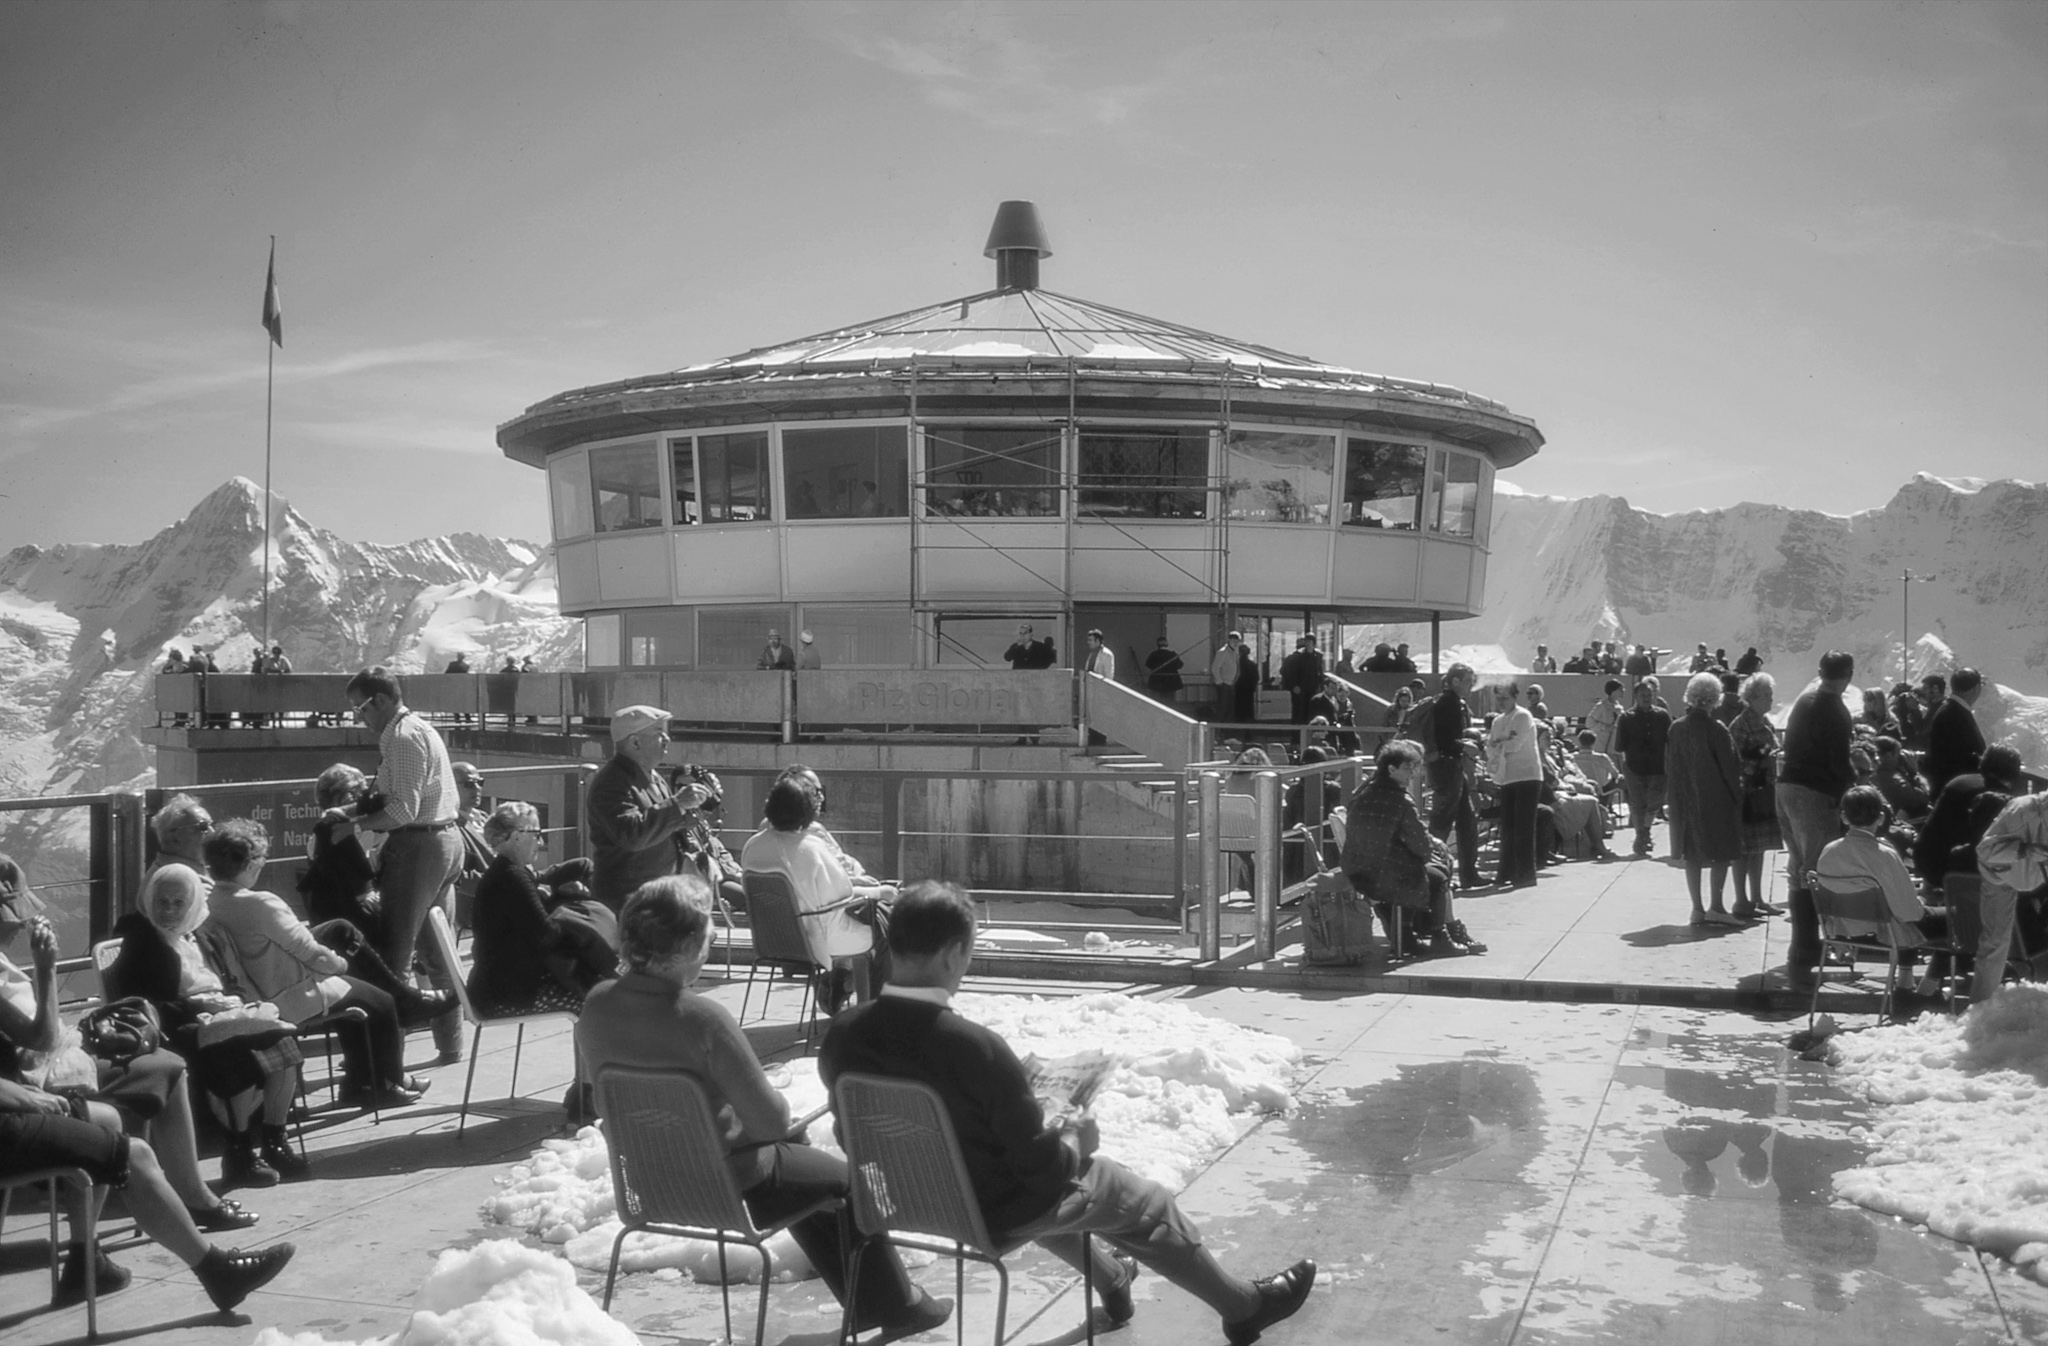 Many people sitting on a snowy terrace outside the circular Piz Gloria Restaurant during winter.